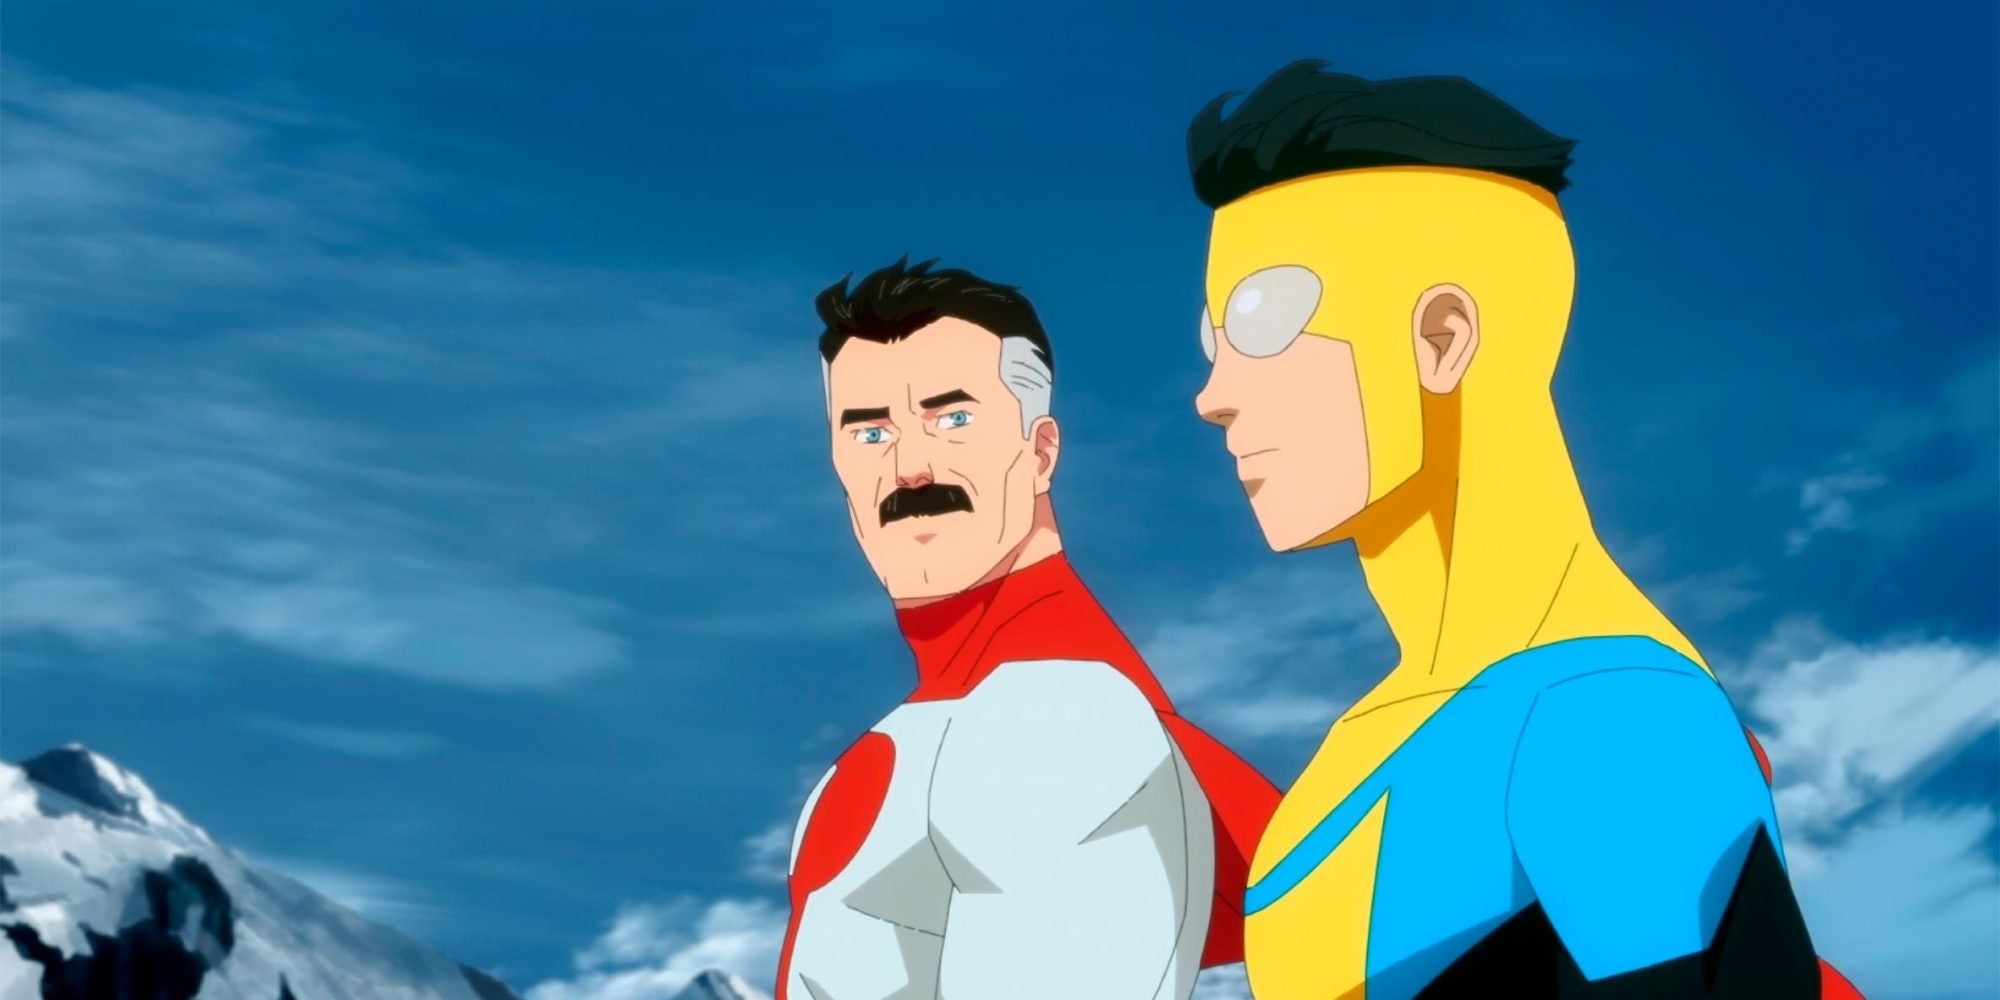 Prime Video's Invincible Episode 5 That Actually Hurt Review